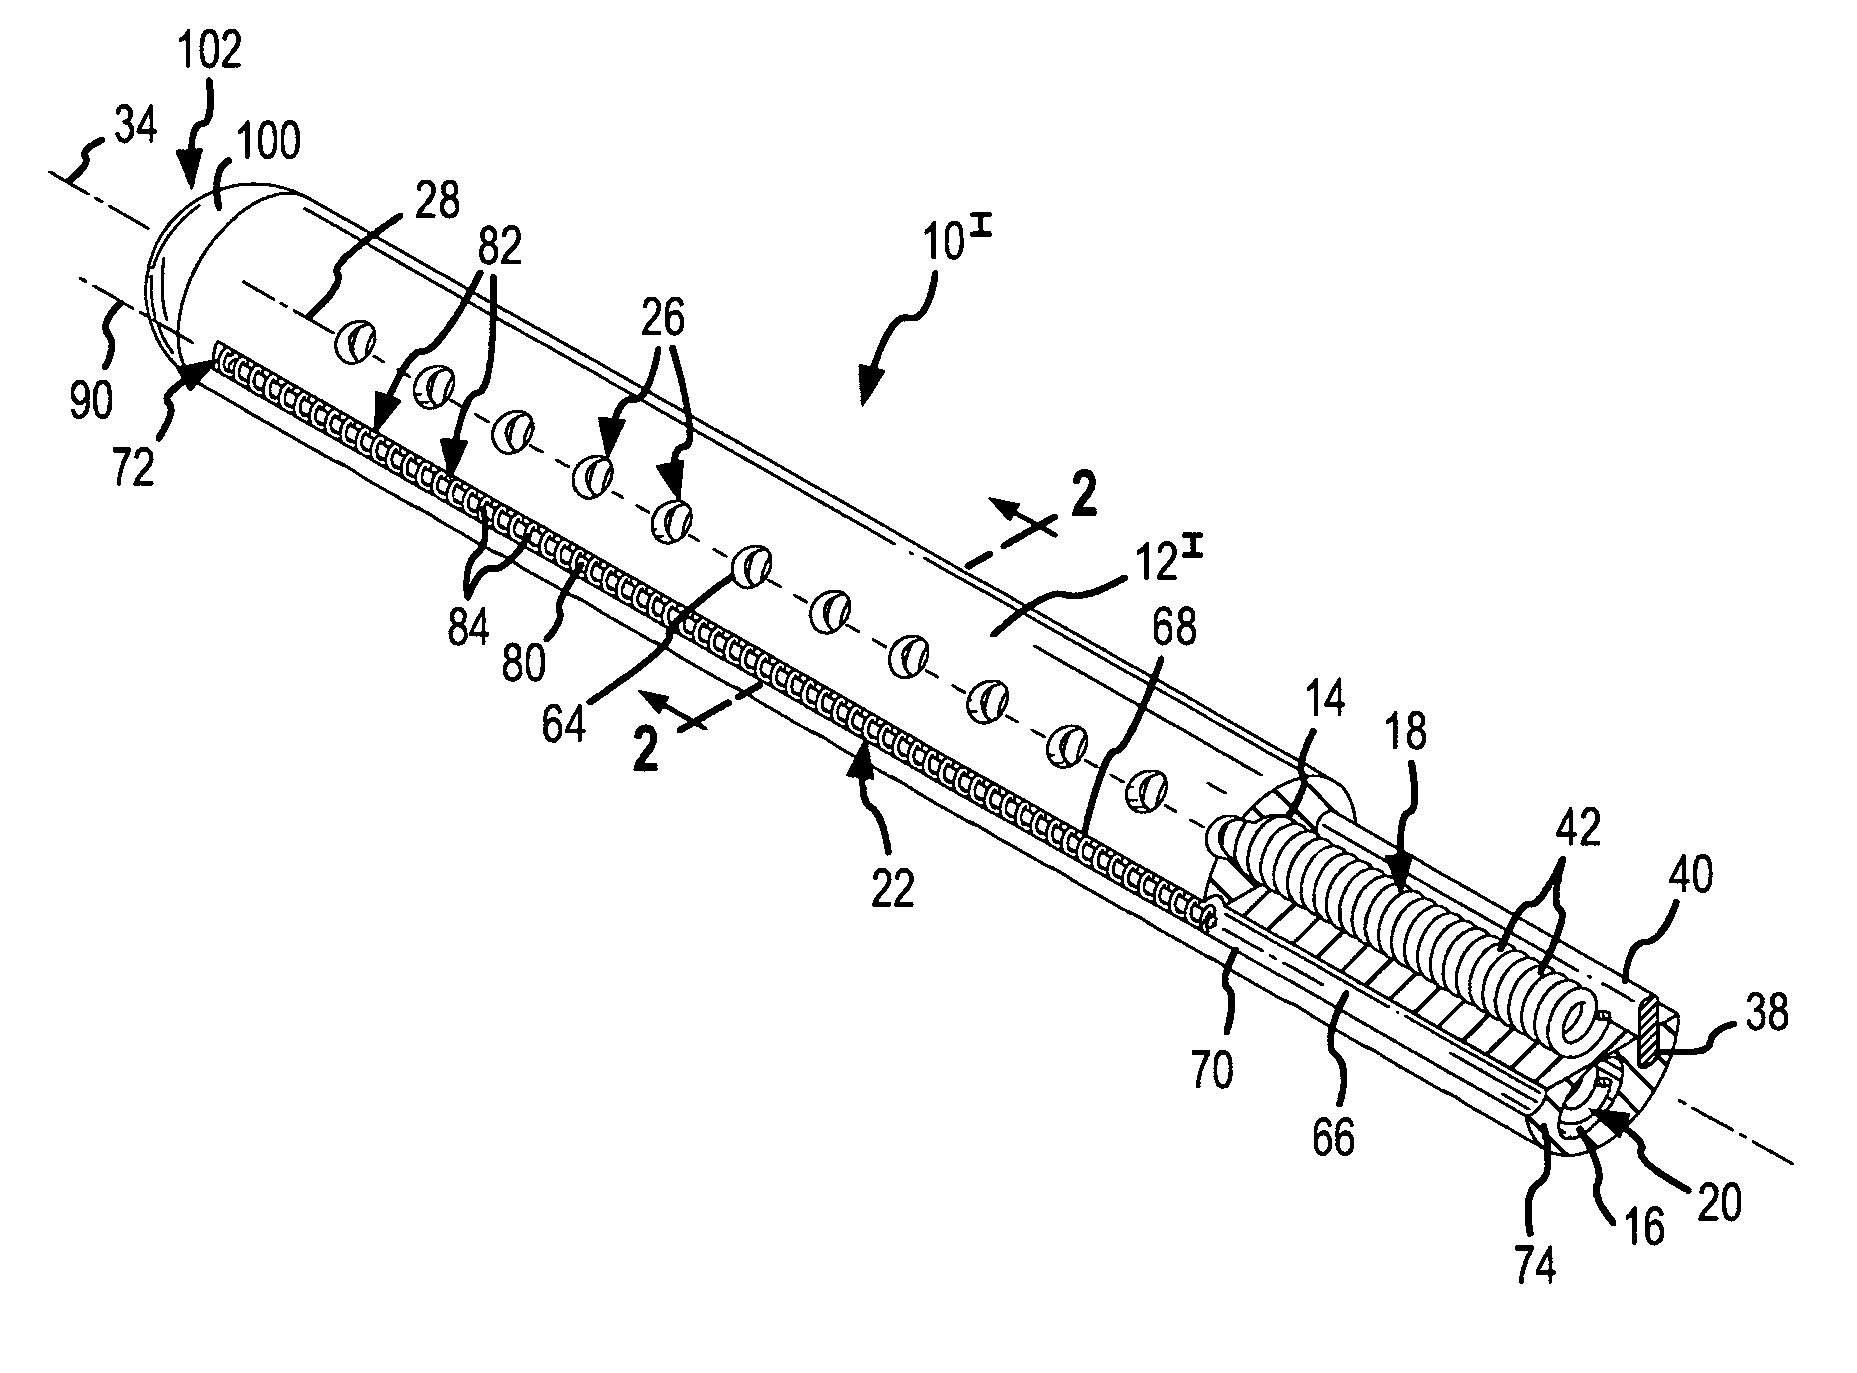 Multipolar, multi-lumen, virtual-electrode catheter with at least one surface electrode and method for ablation